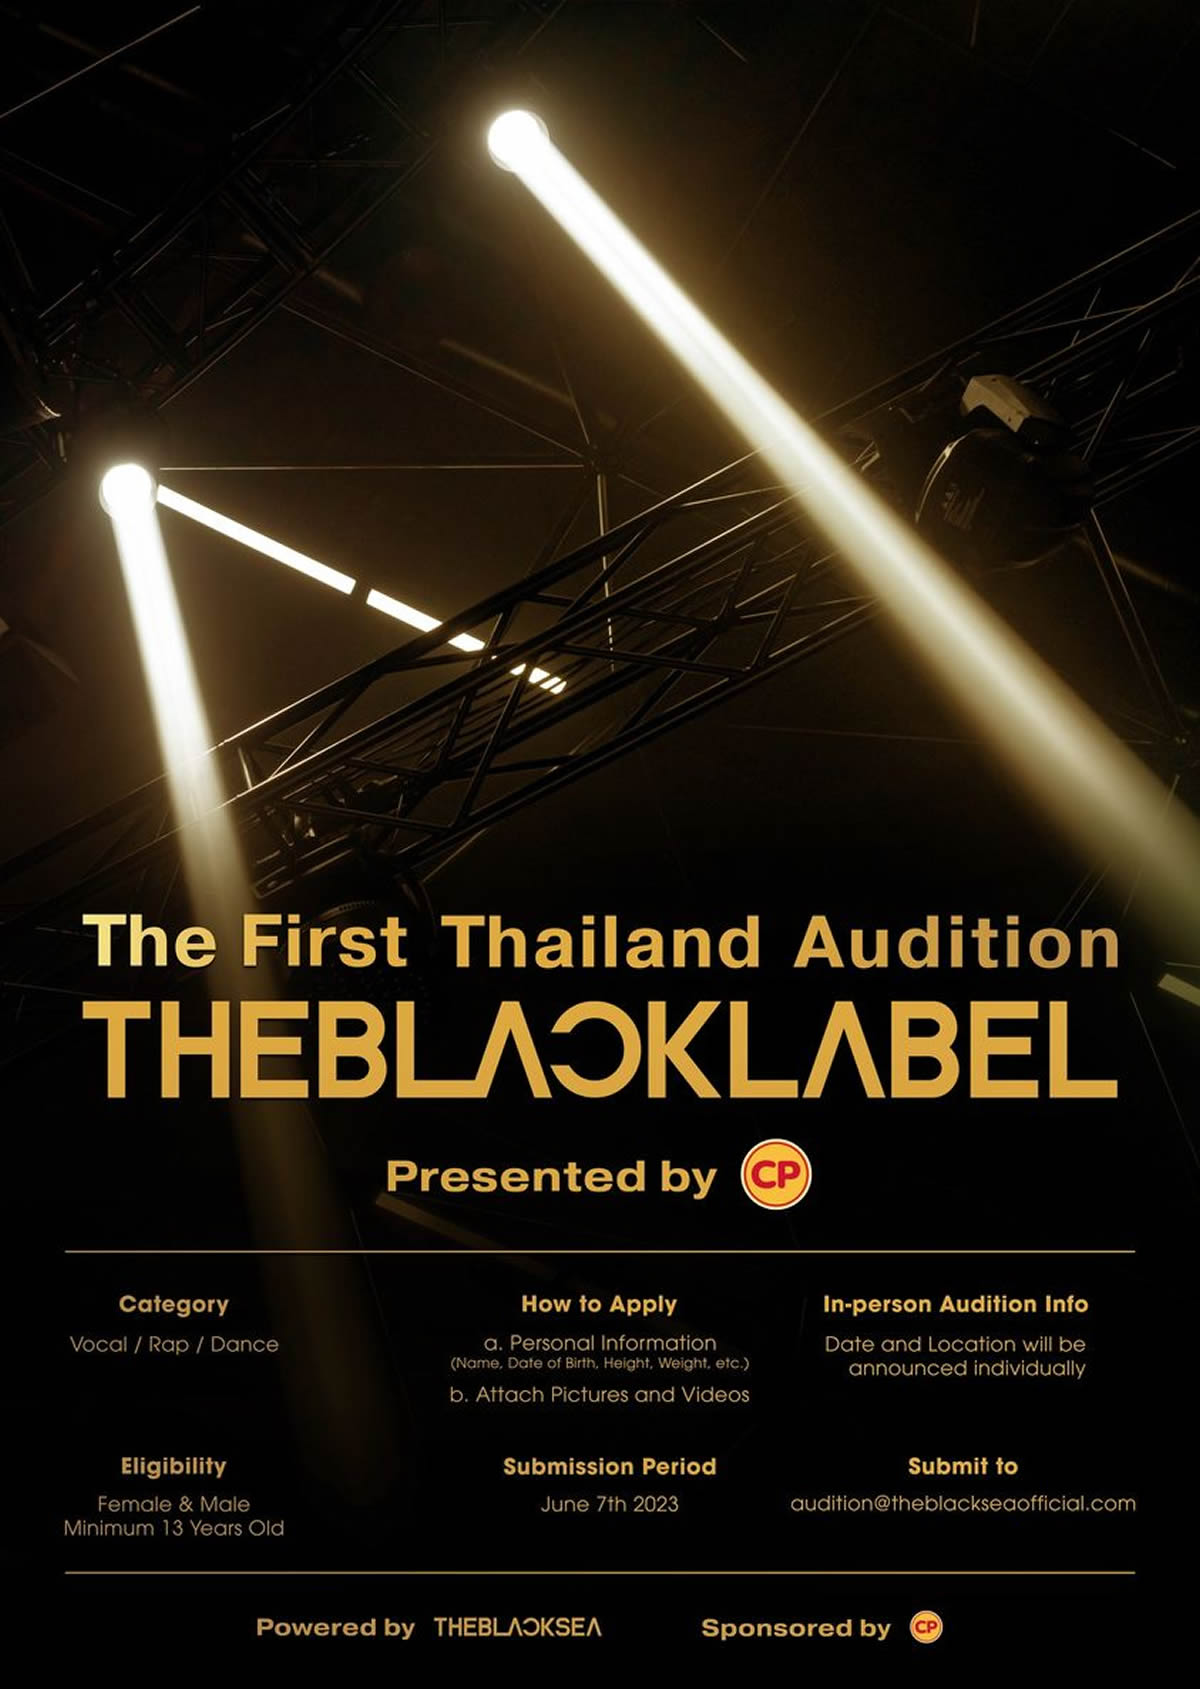 THEBLACKLABEL's First Thailand Audition Presented By CP   ＝ THEBLACKSEA